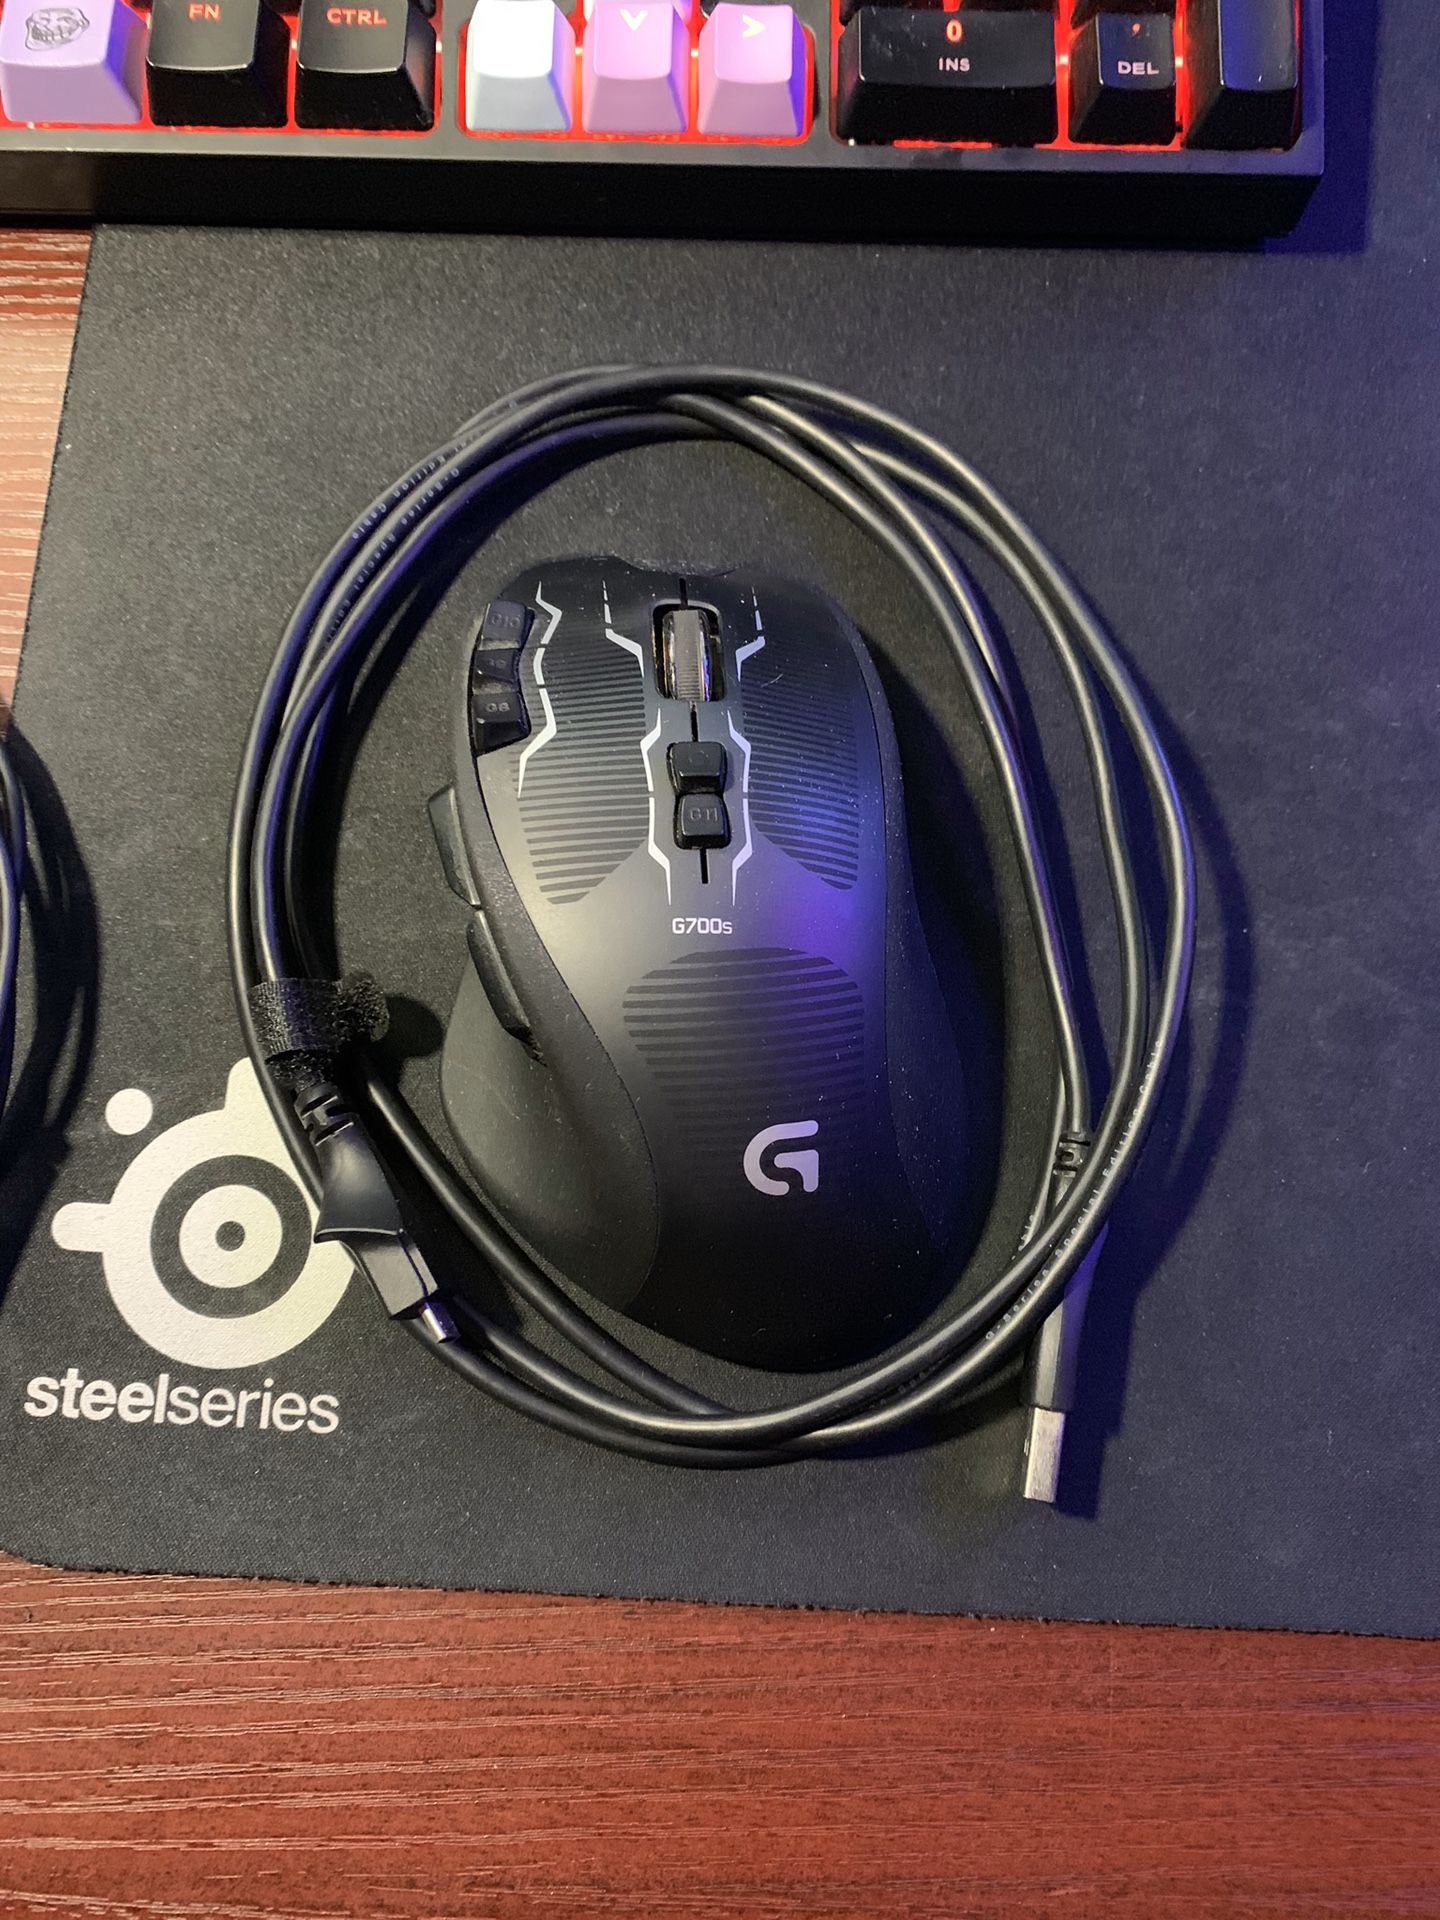 Logitech G700s wireless gaming mouse